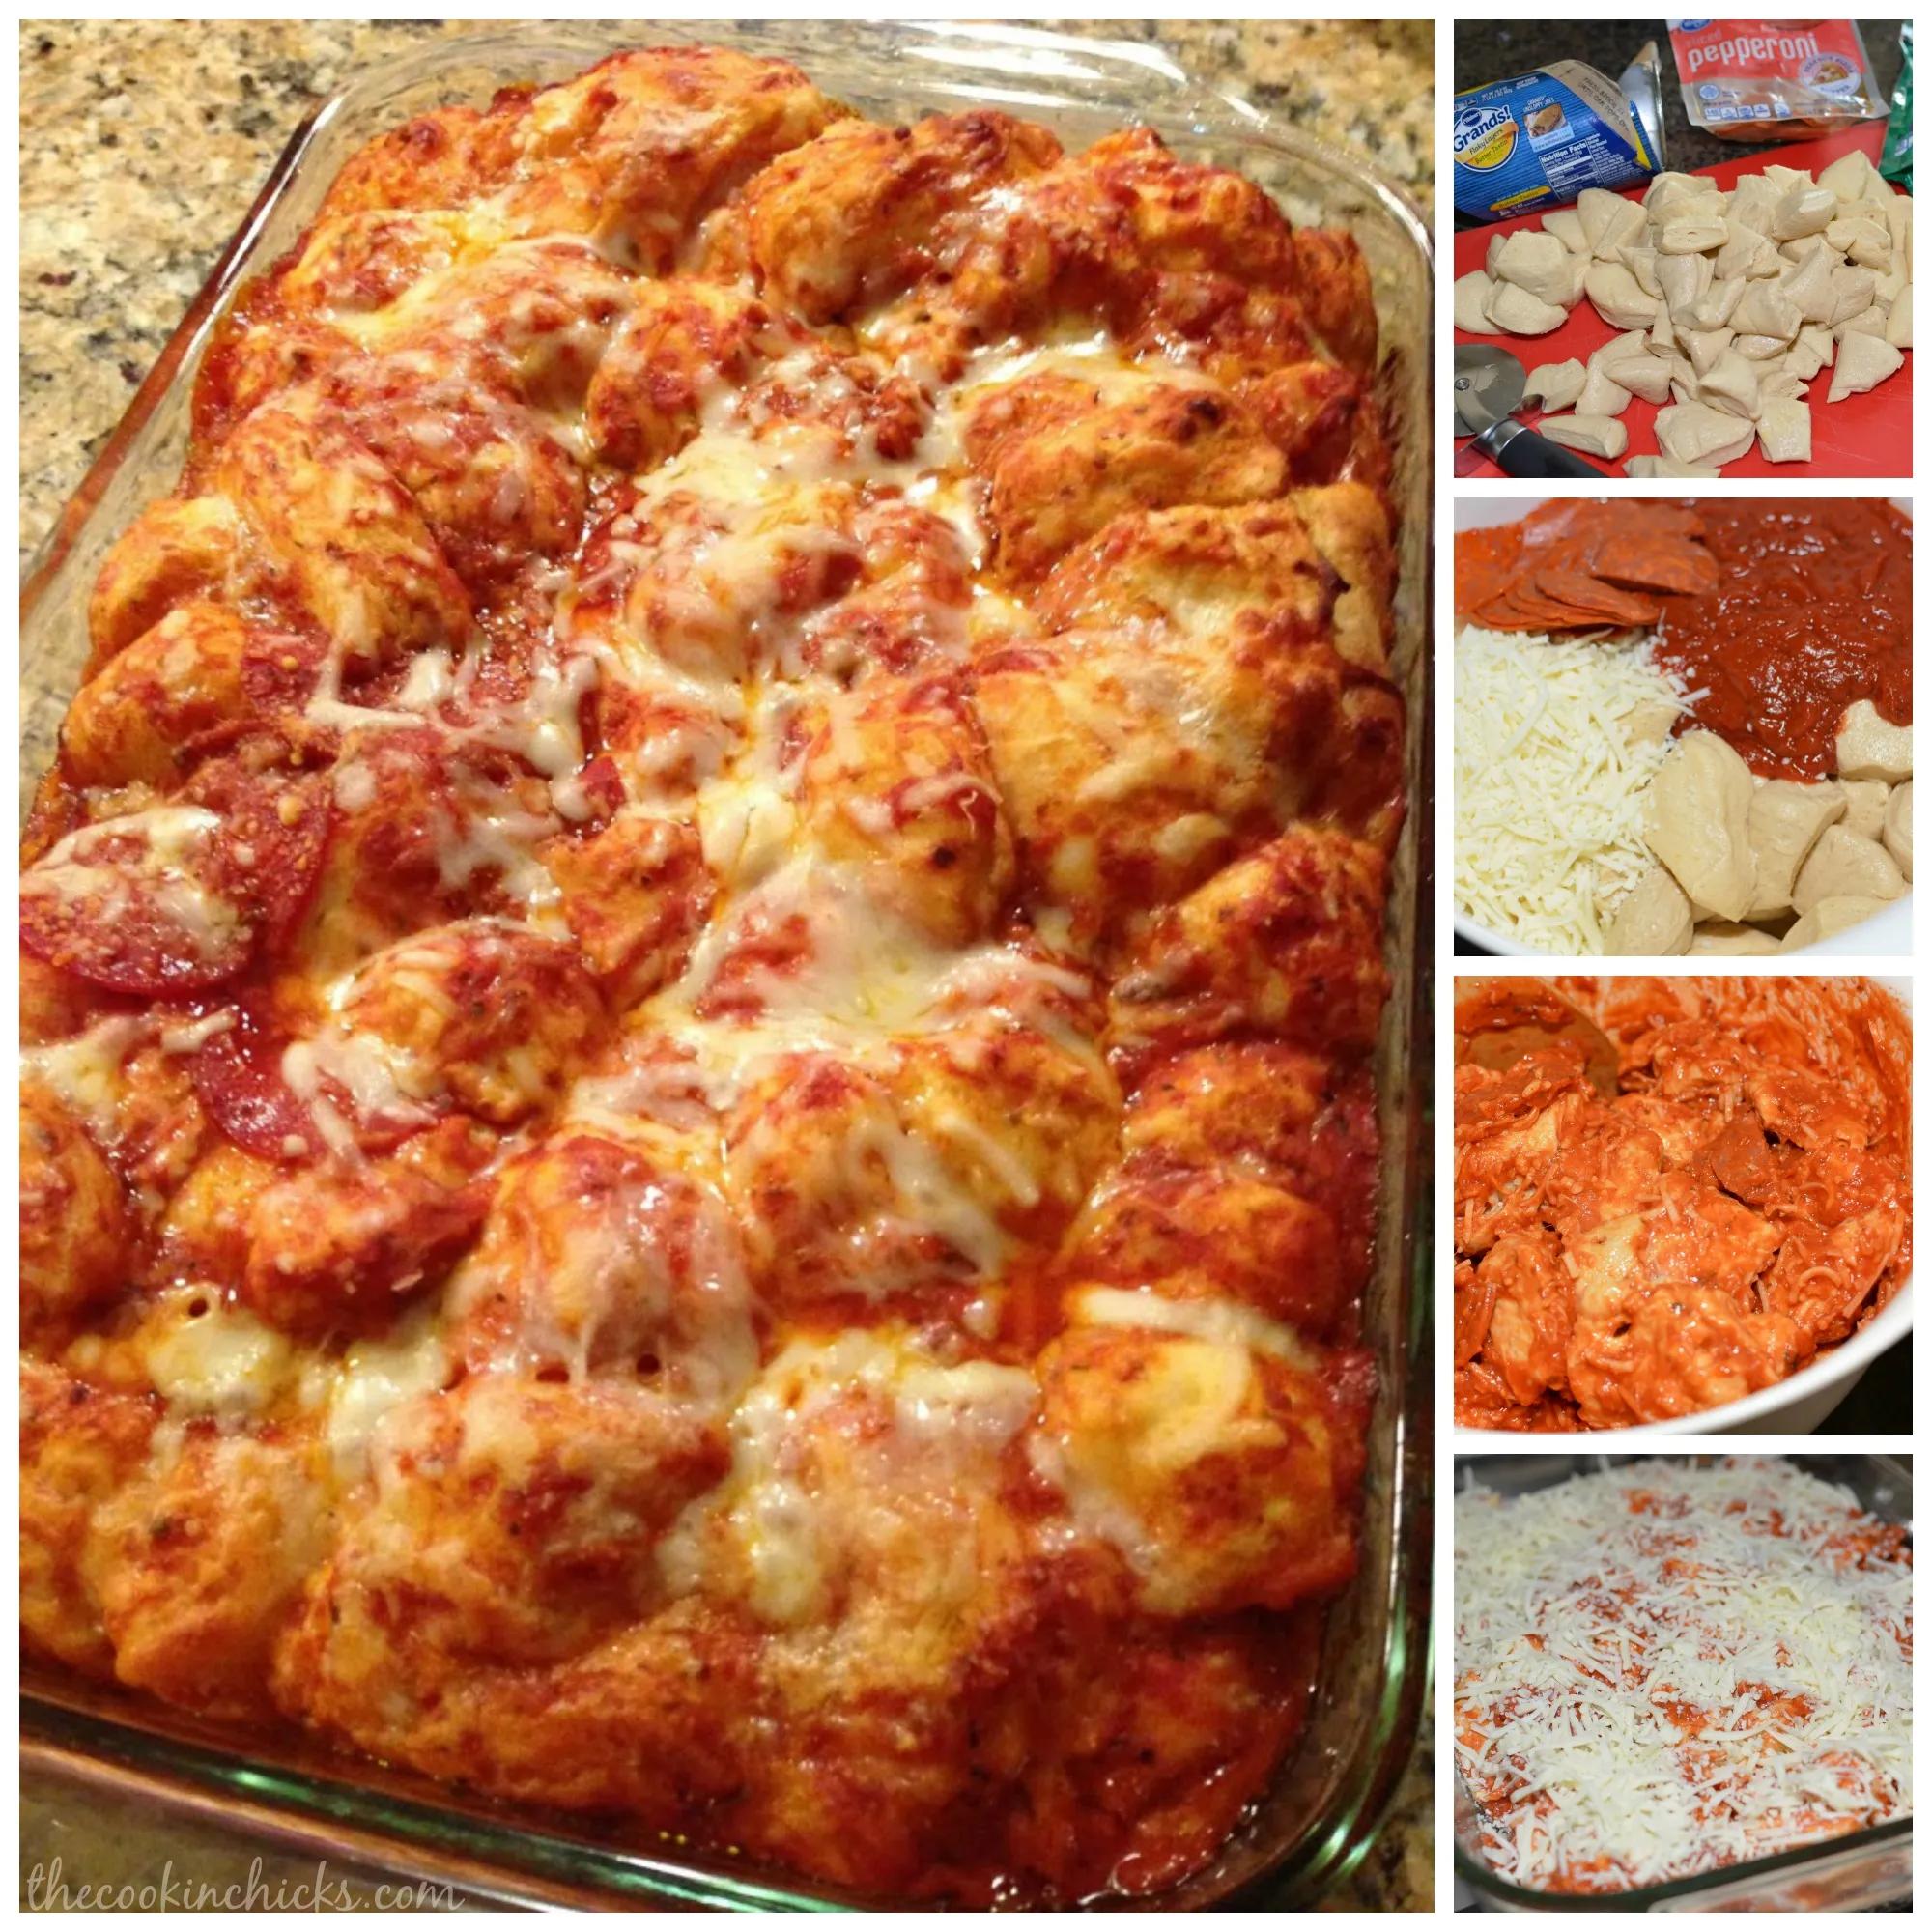 Bubble Up Pizza Casserole - The Cookin Chicks